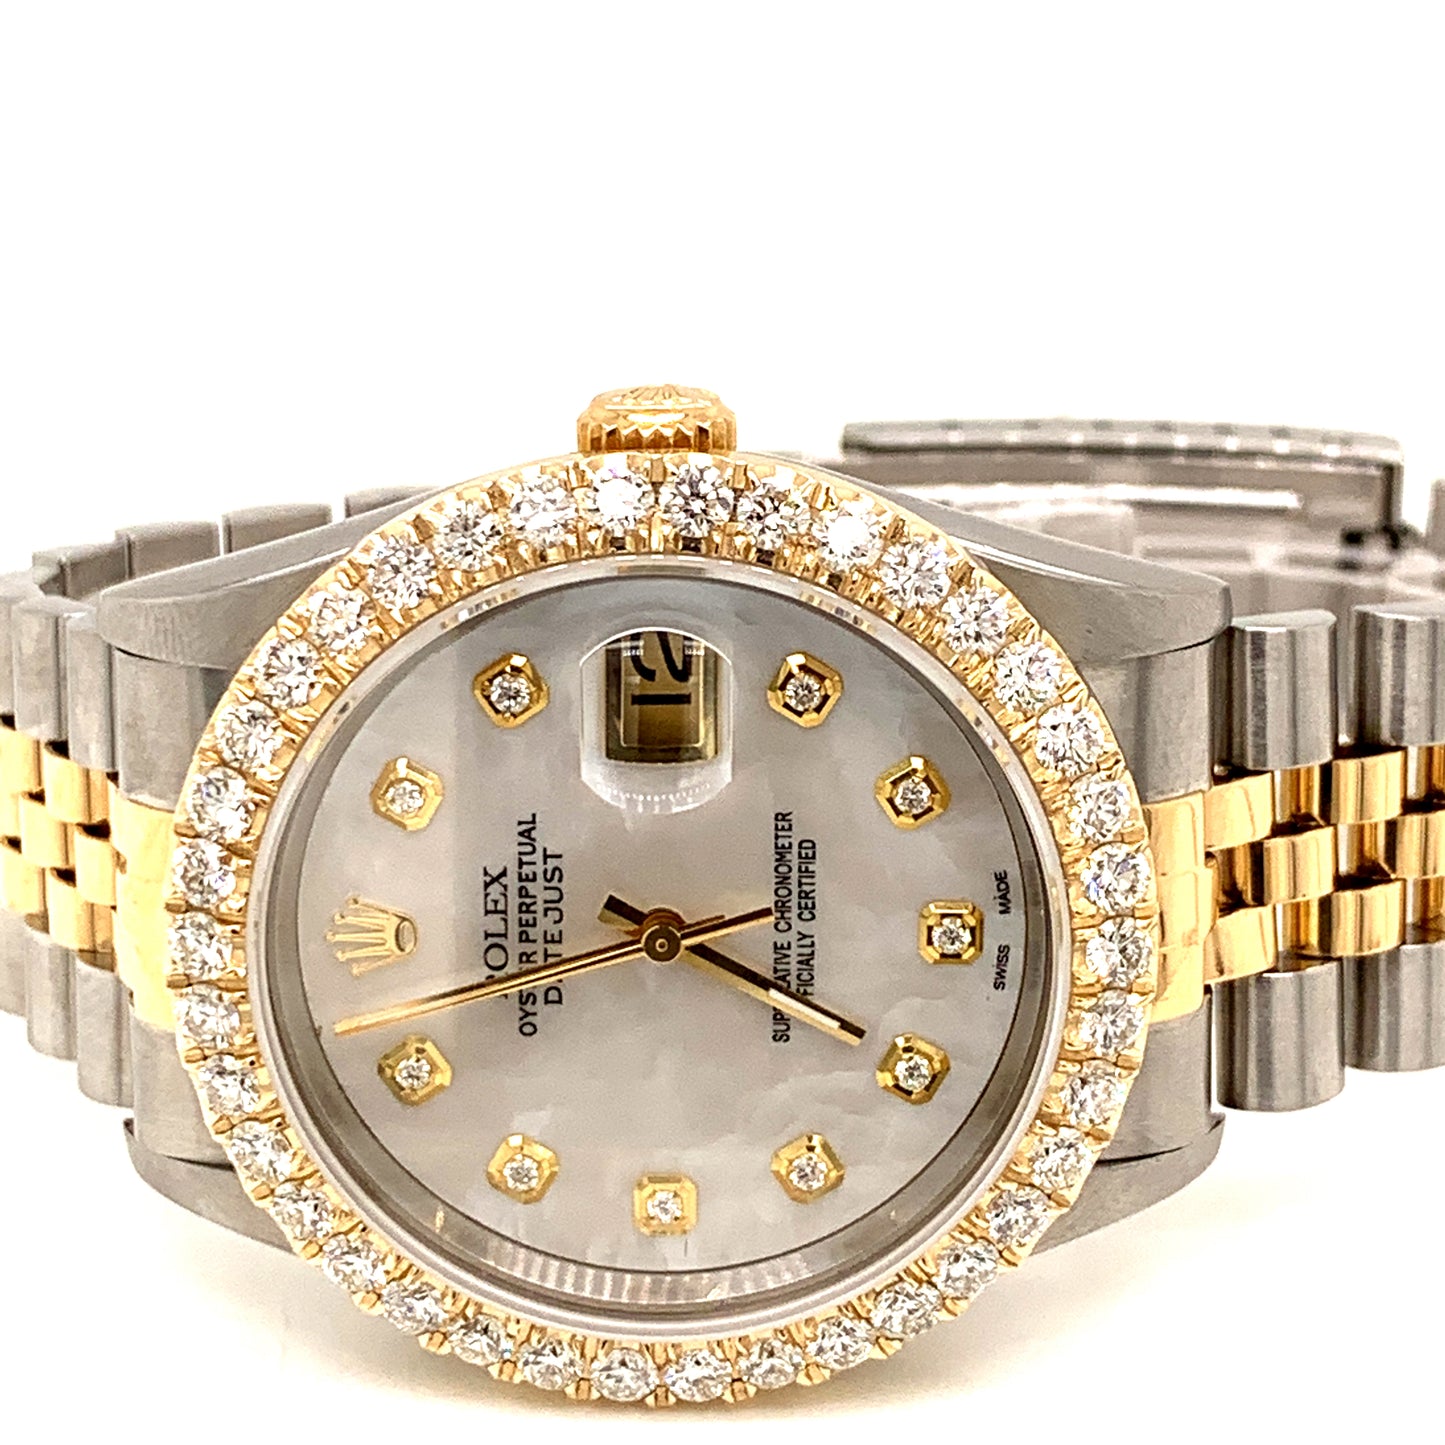 Rolex Datejust 18k Stainless Steel 16233 White mother of pearl with diamond bezel